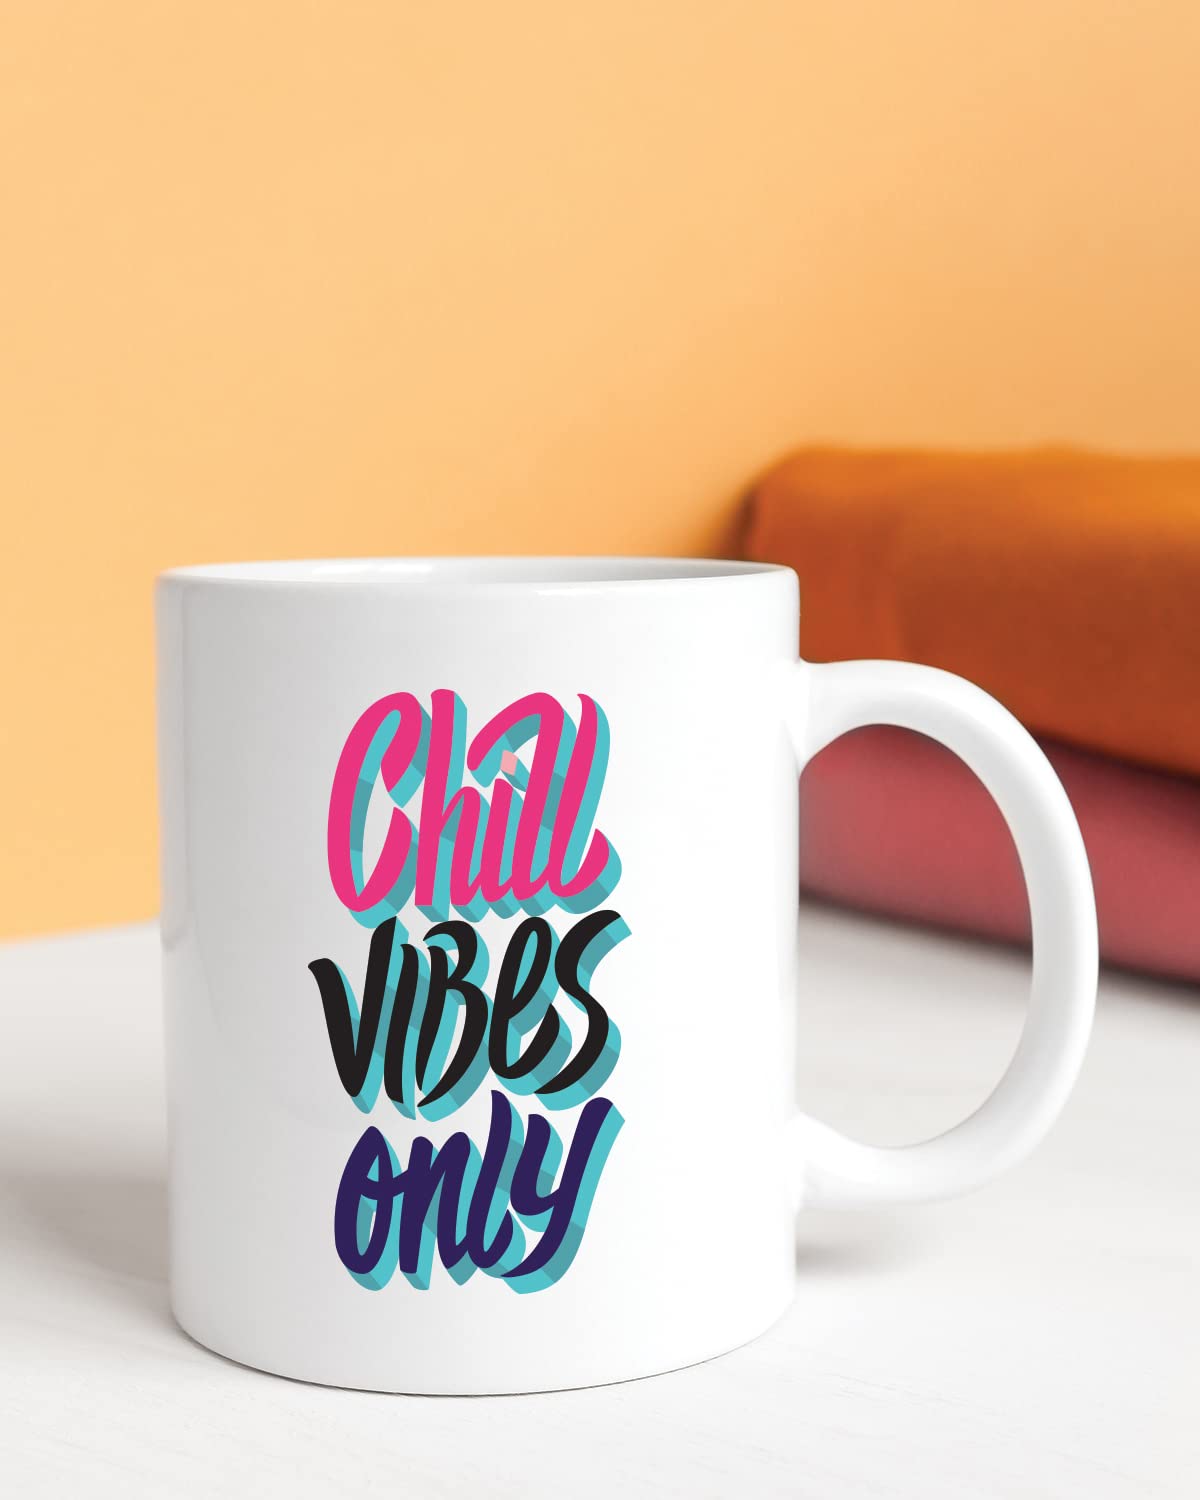 CHILL Vibes ONLY Coffee Mug - Gift for Friend, Birthday Gift, Birthday Mug, Motivational Quotes Mug, Mugs with Funny & Funky Dialogues, Bollywood Mugs, Funny Mugs for Him & Her